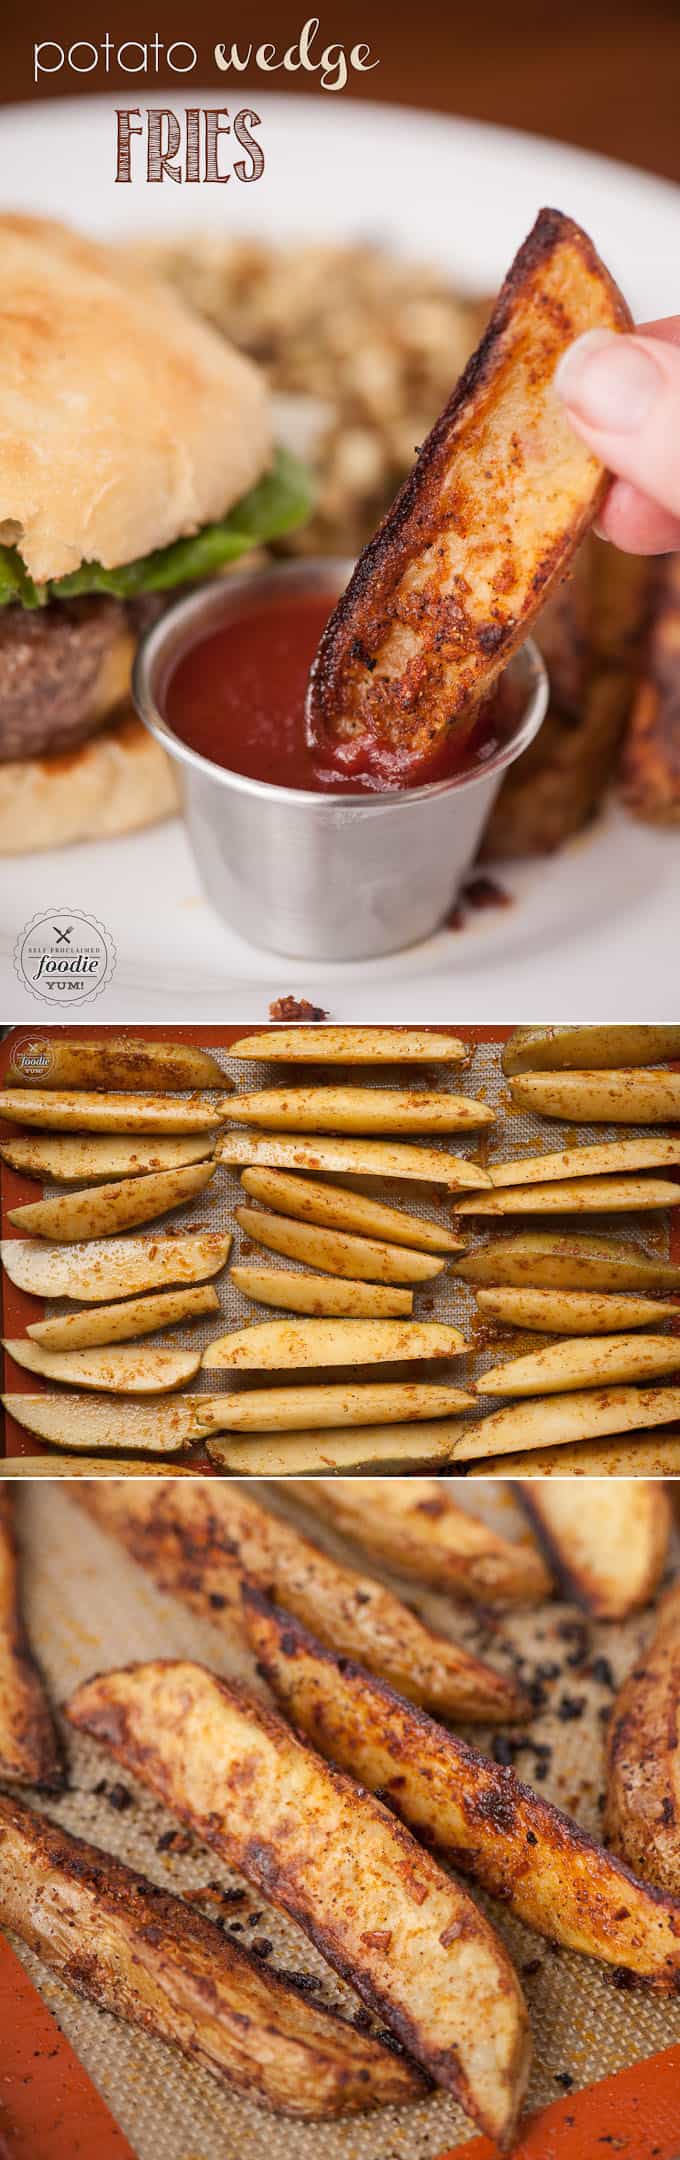 Oven baked and perfectly seasoned Potato Wedge Fries are easy to make and make a great side for your burger or dog.